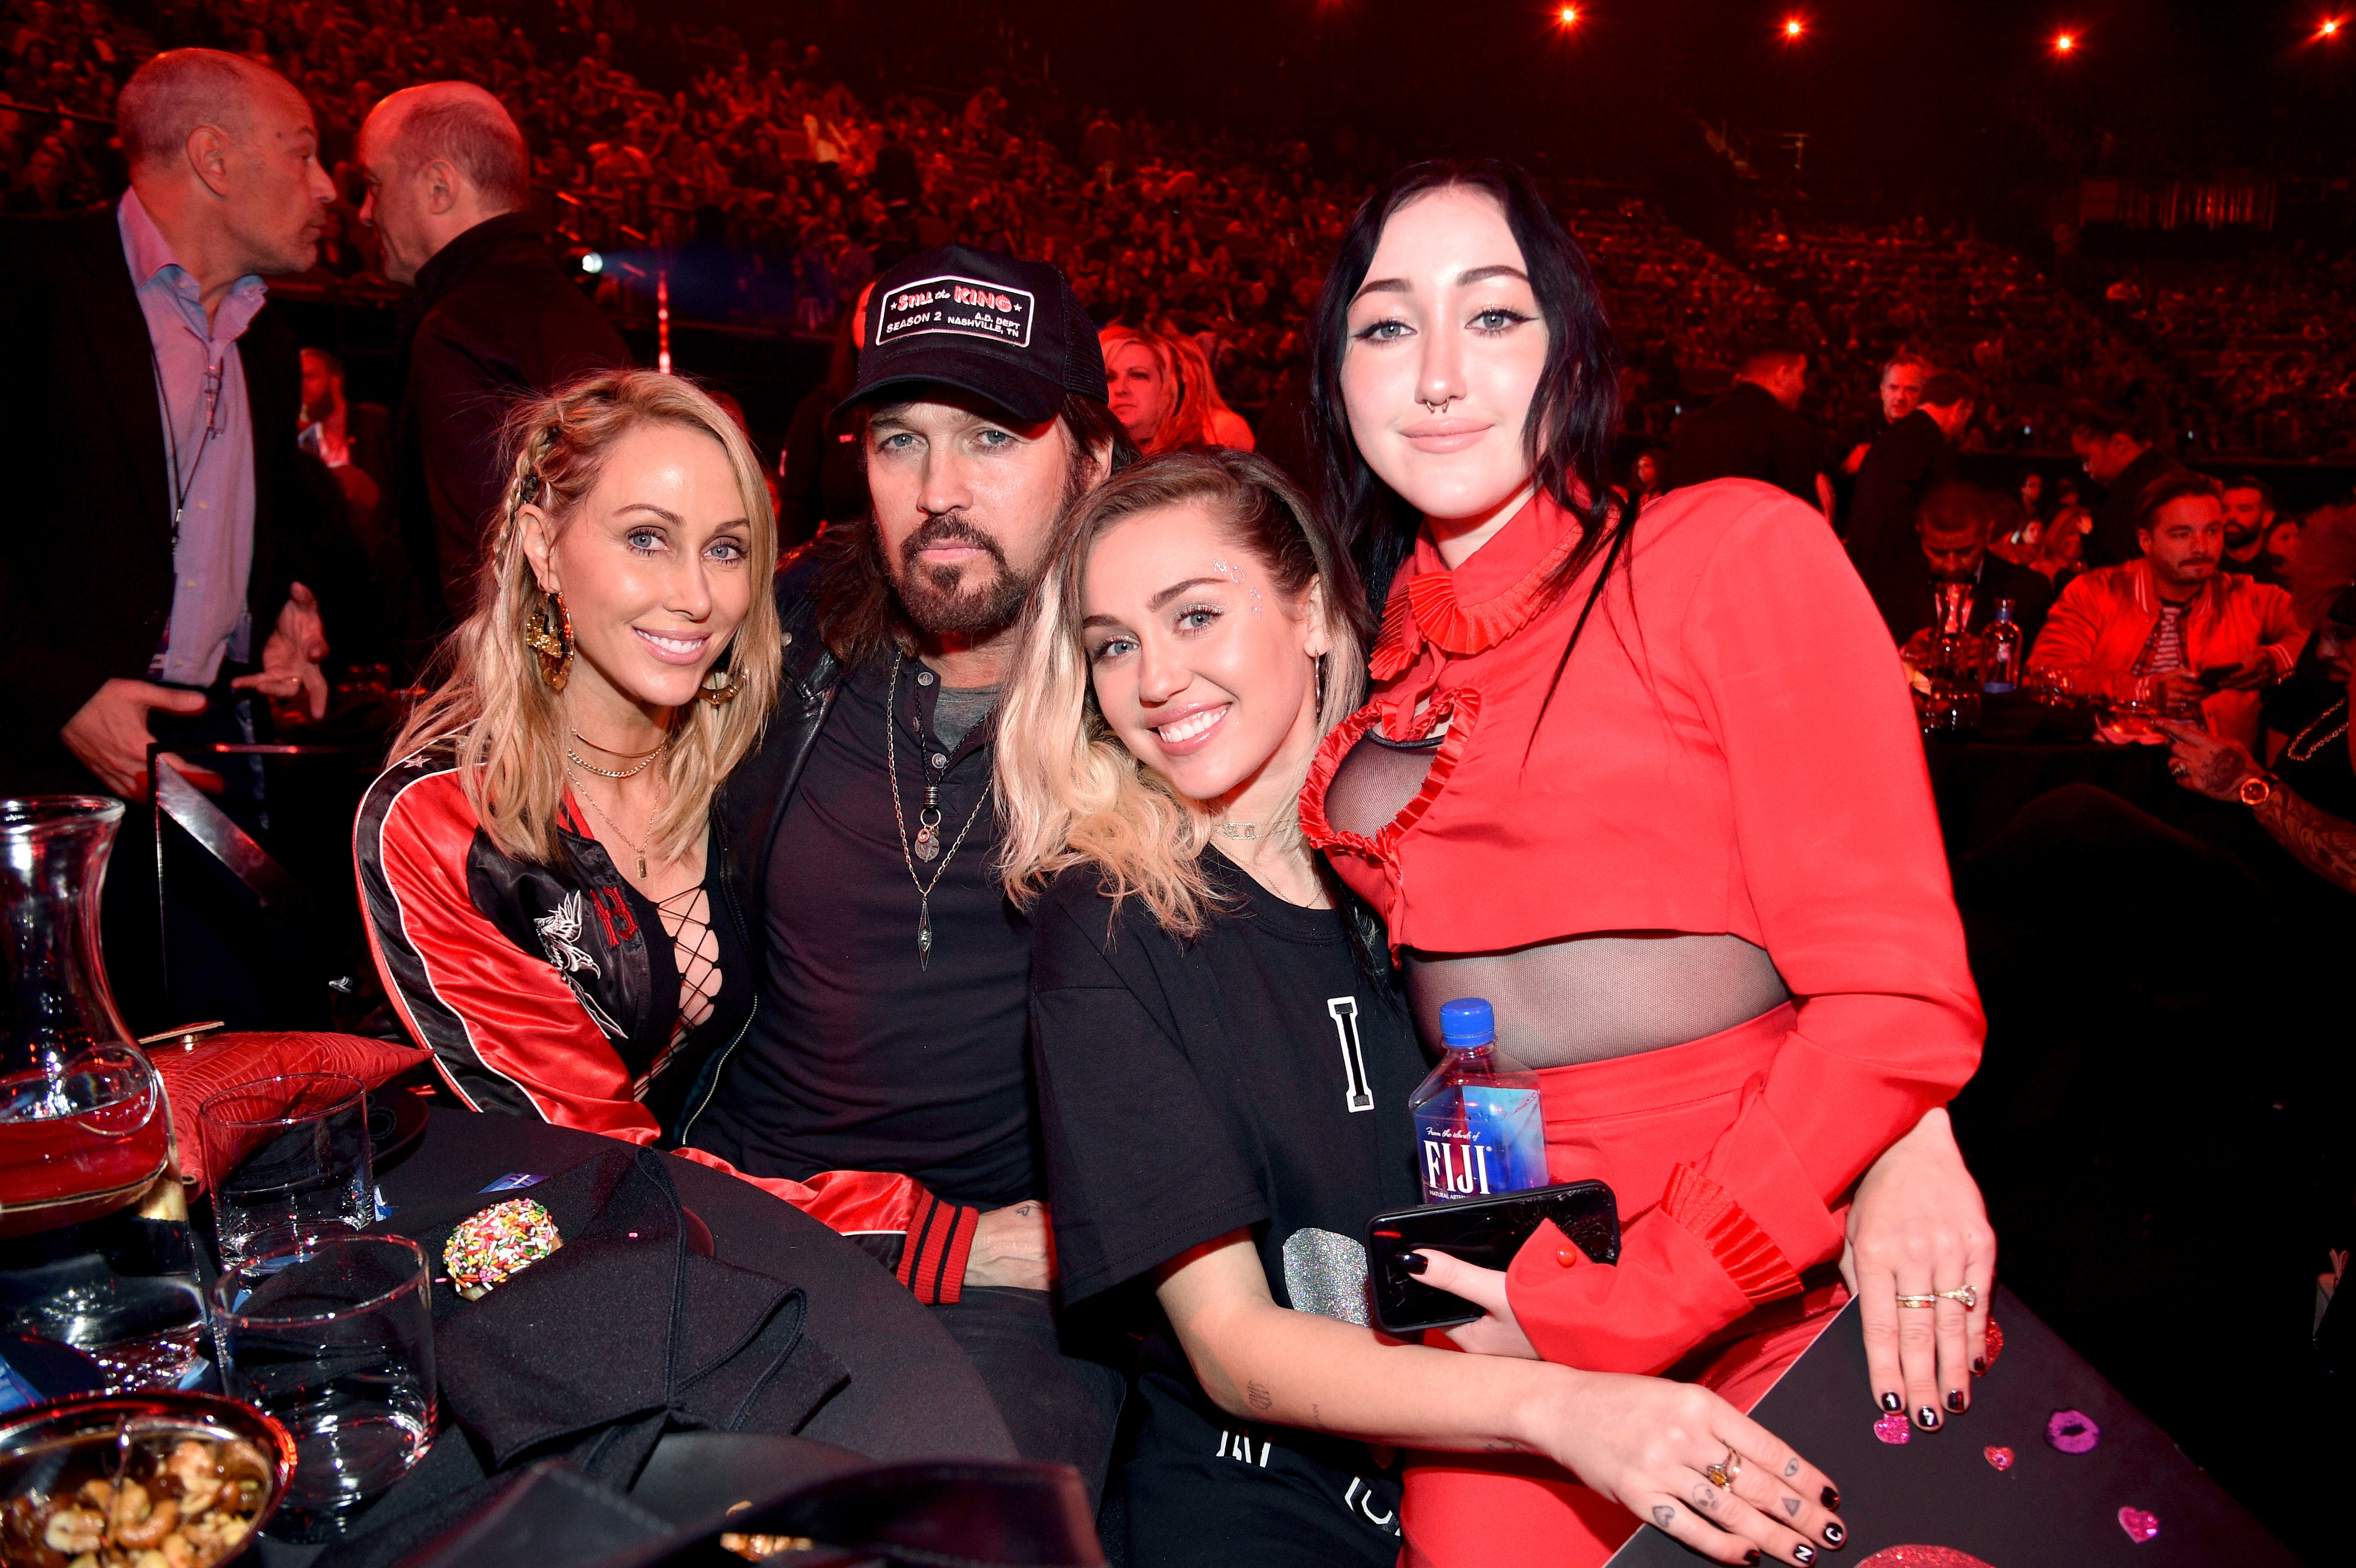 miley and her family at an event